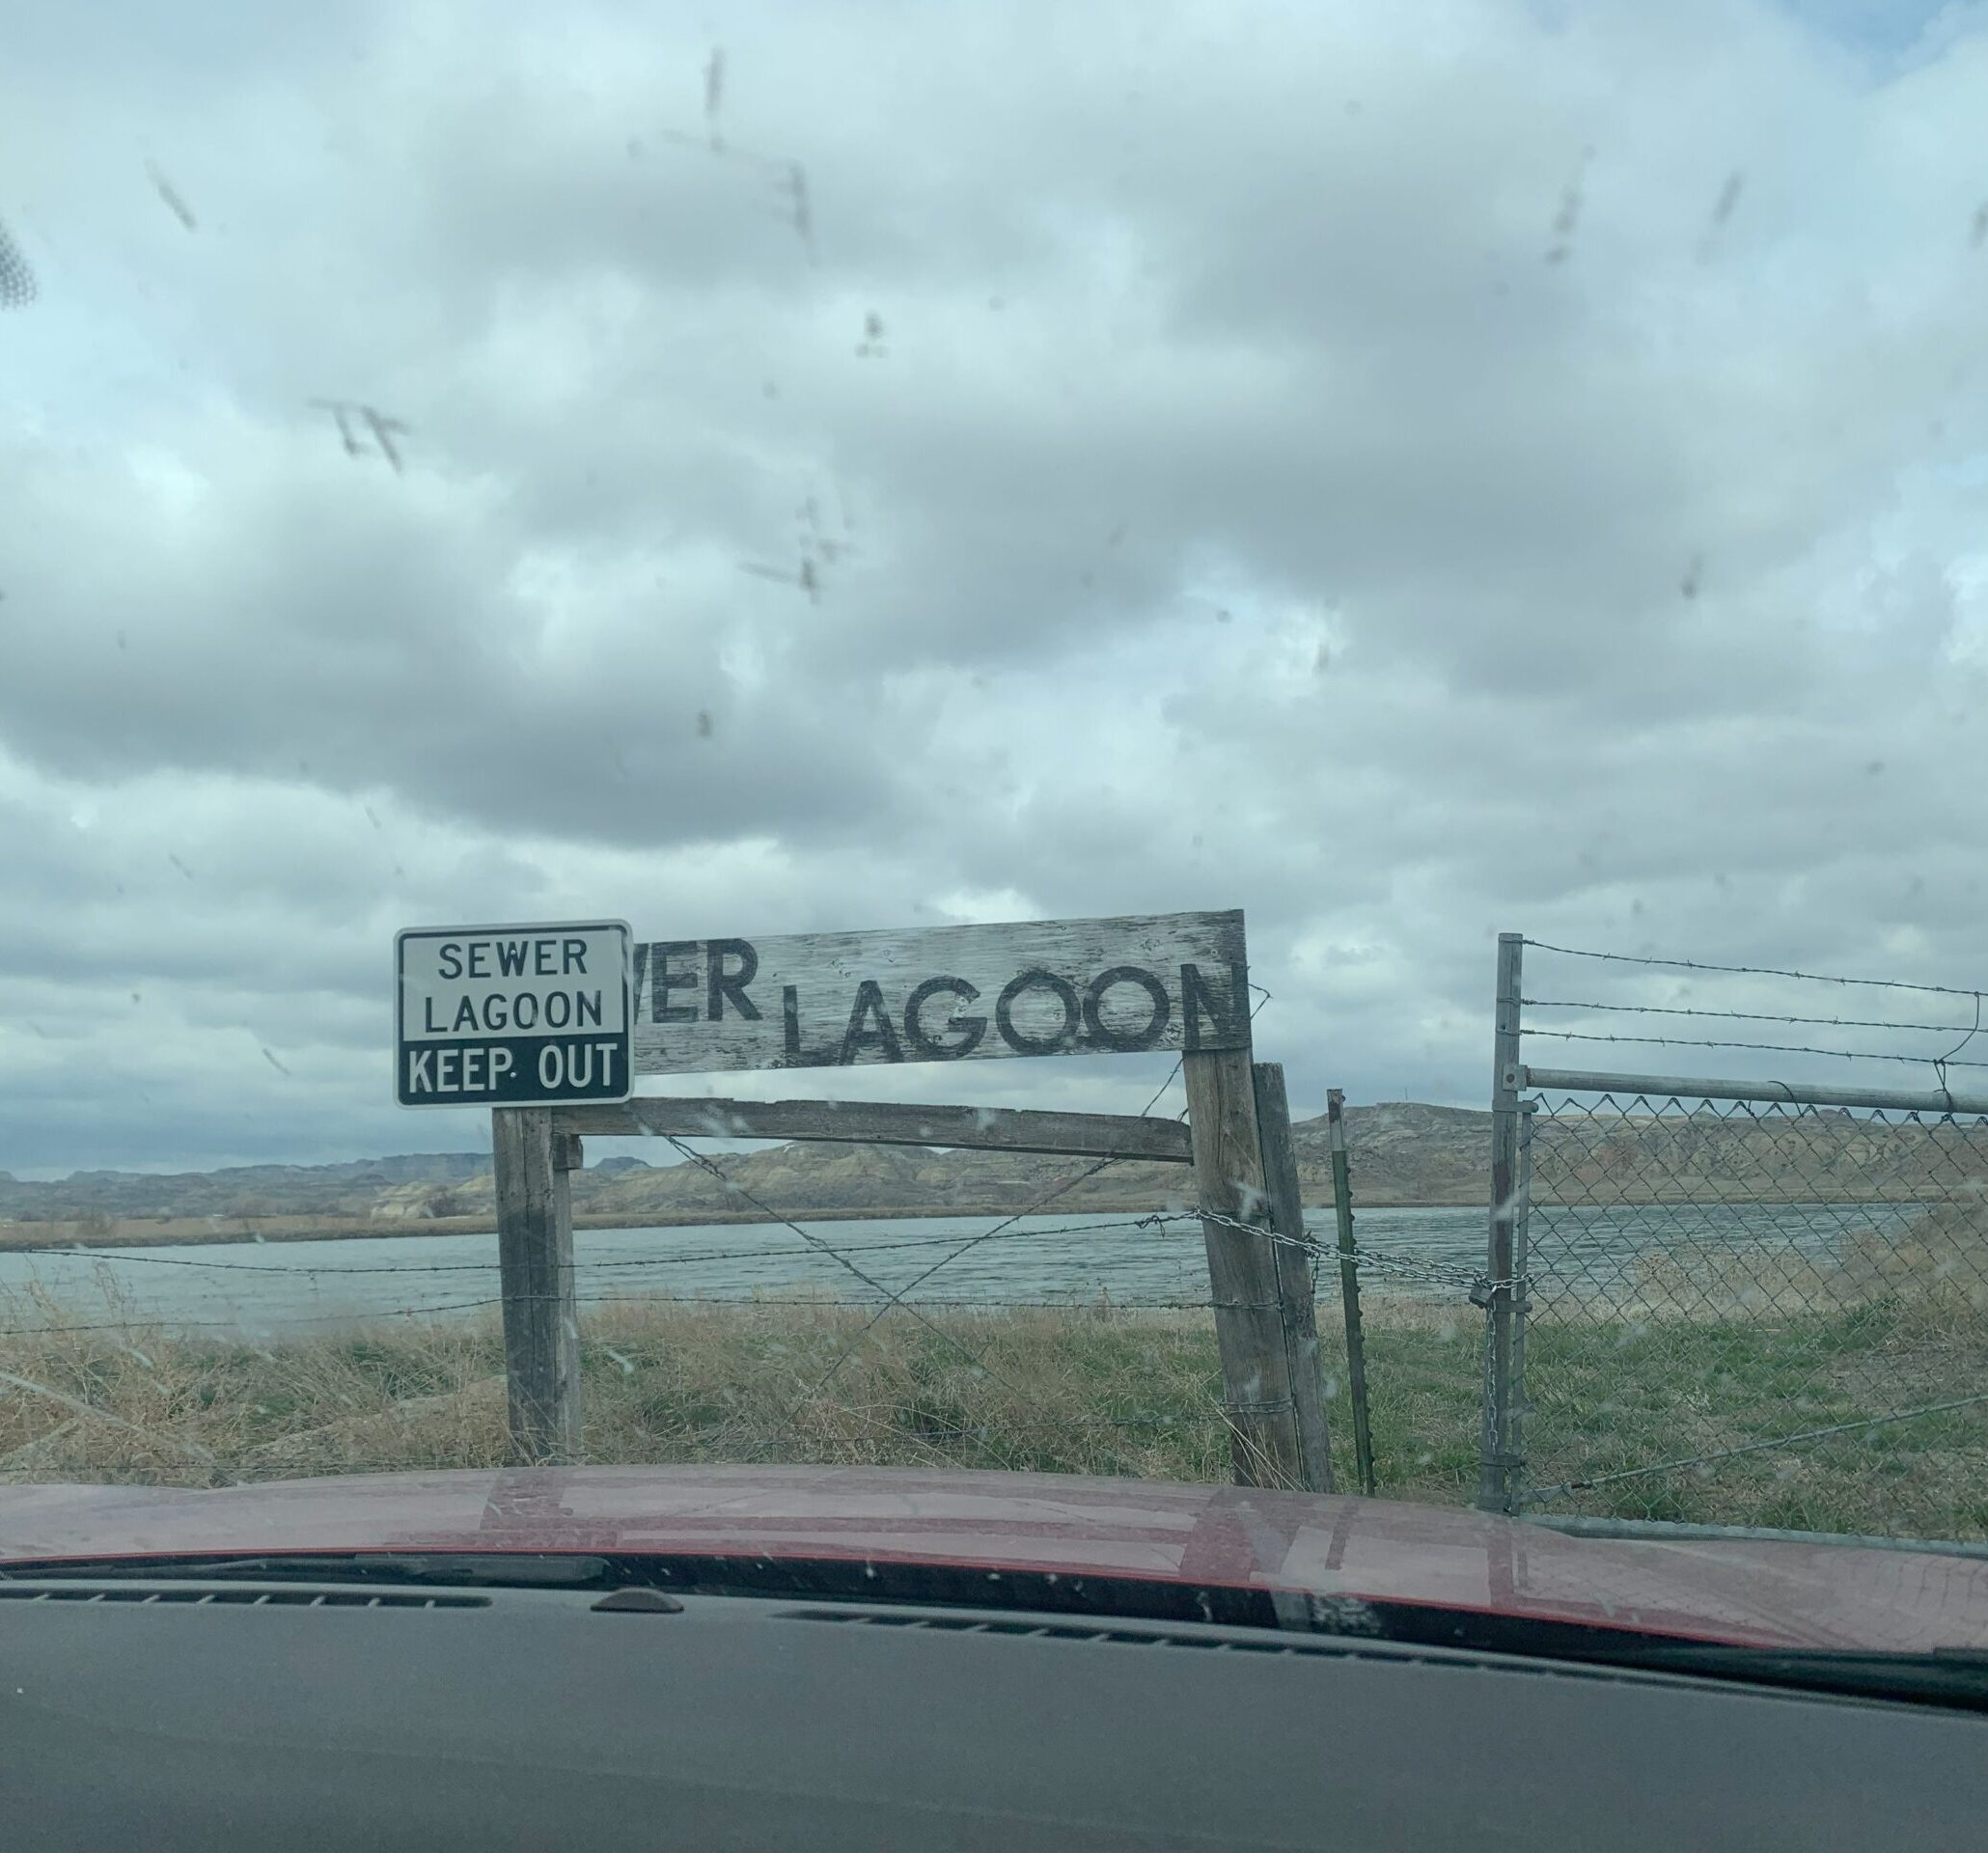 A photo taken through the windshield of a vehicle. There is a locked gate in front of some water that is a sewer lagoon. There are 2 signs stating that it is a sewer lagoon and one says KEEP OUT. The cloudy skies look ominous.